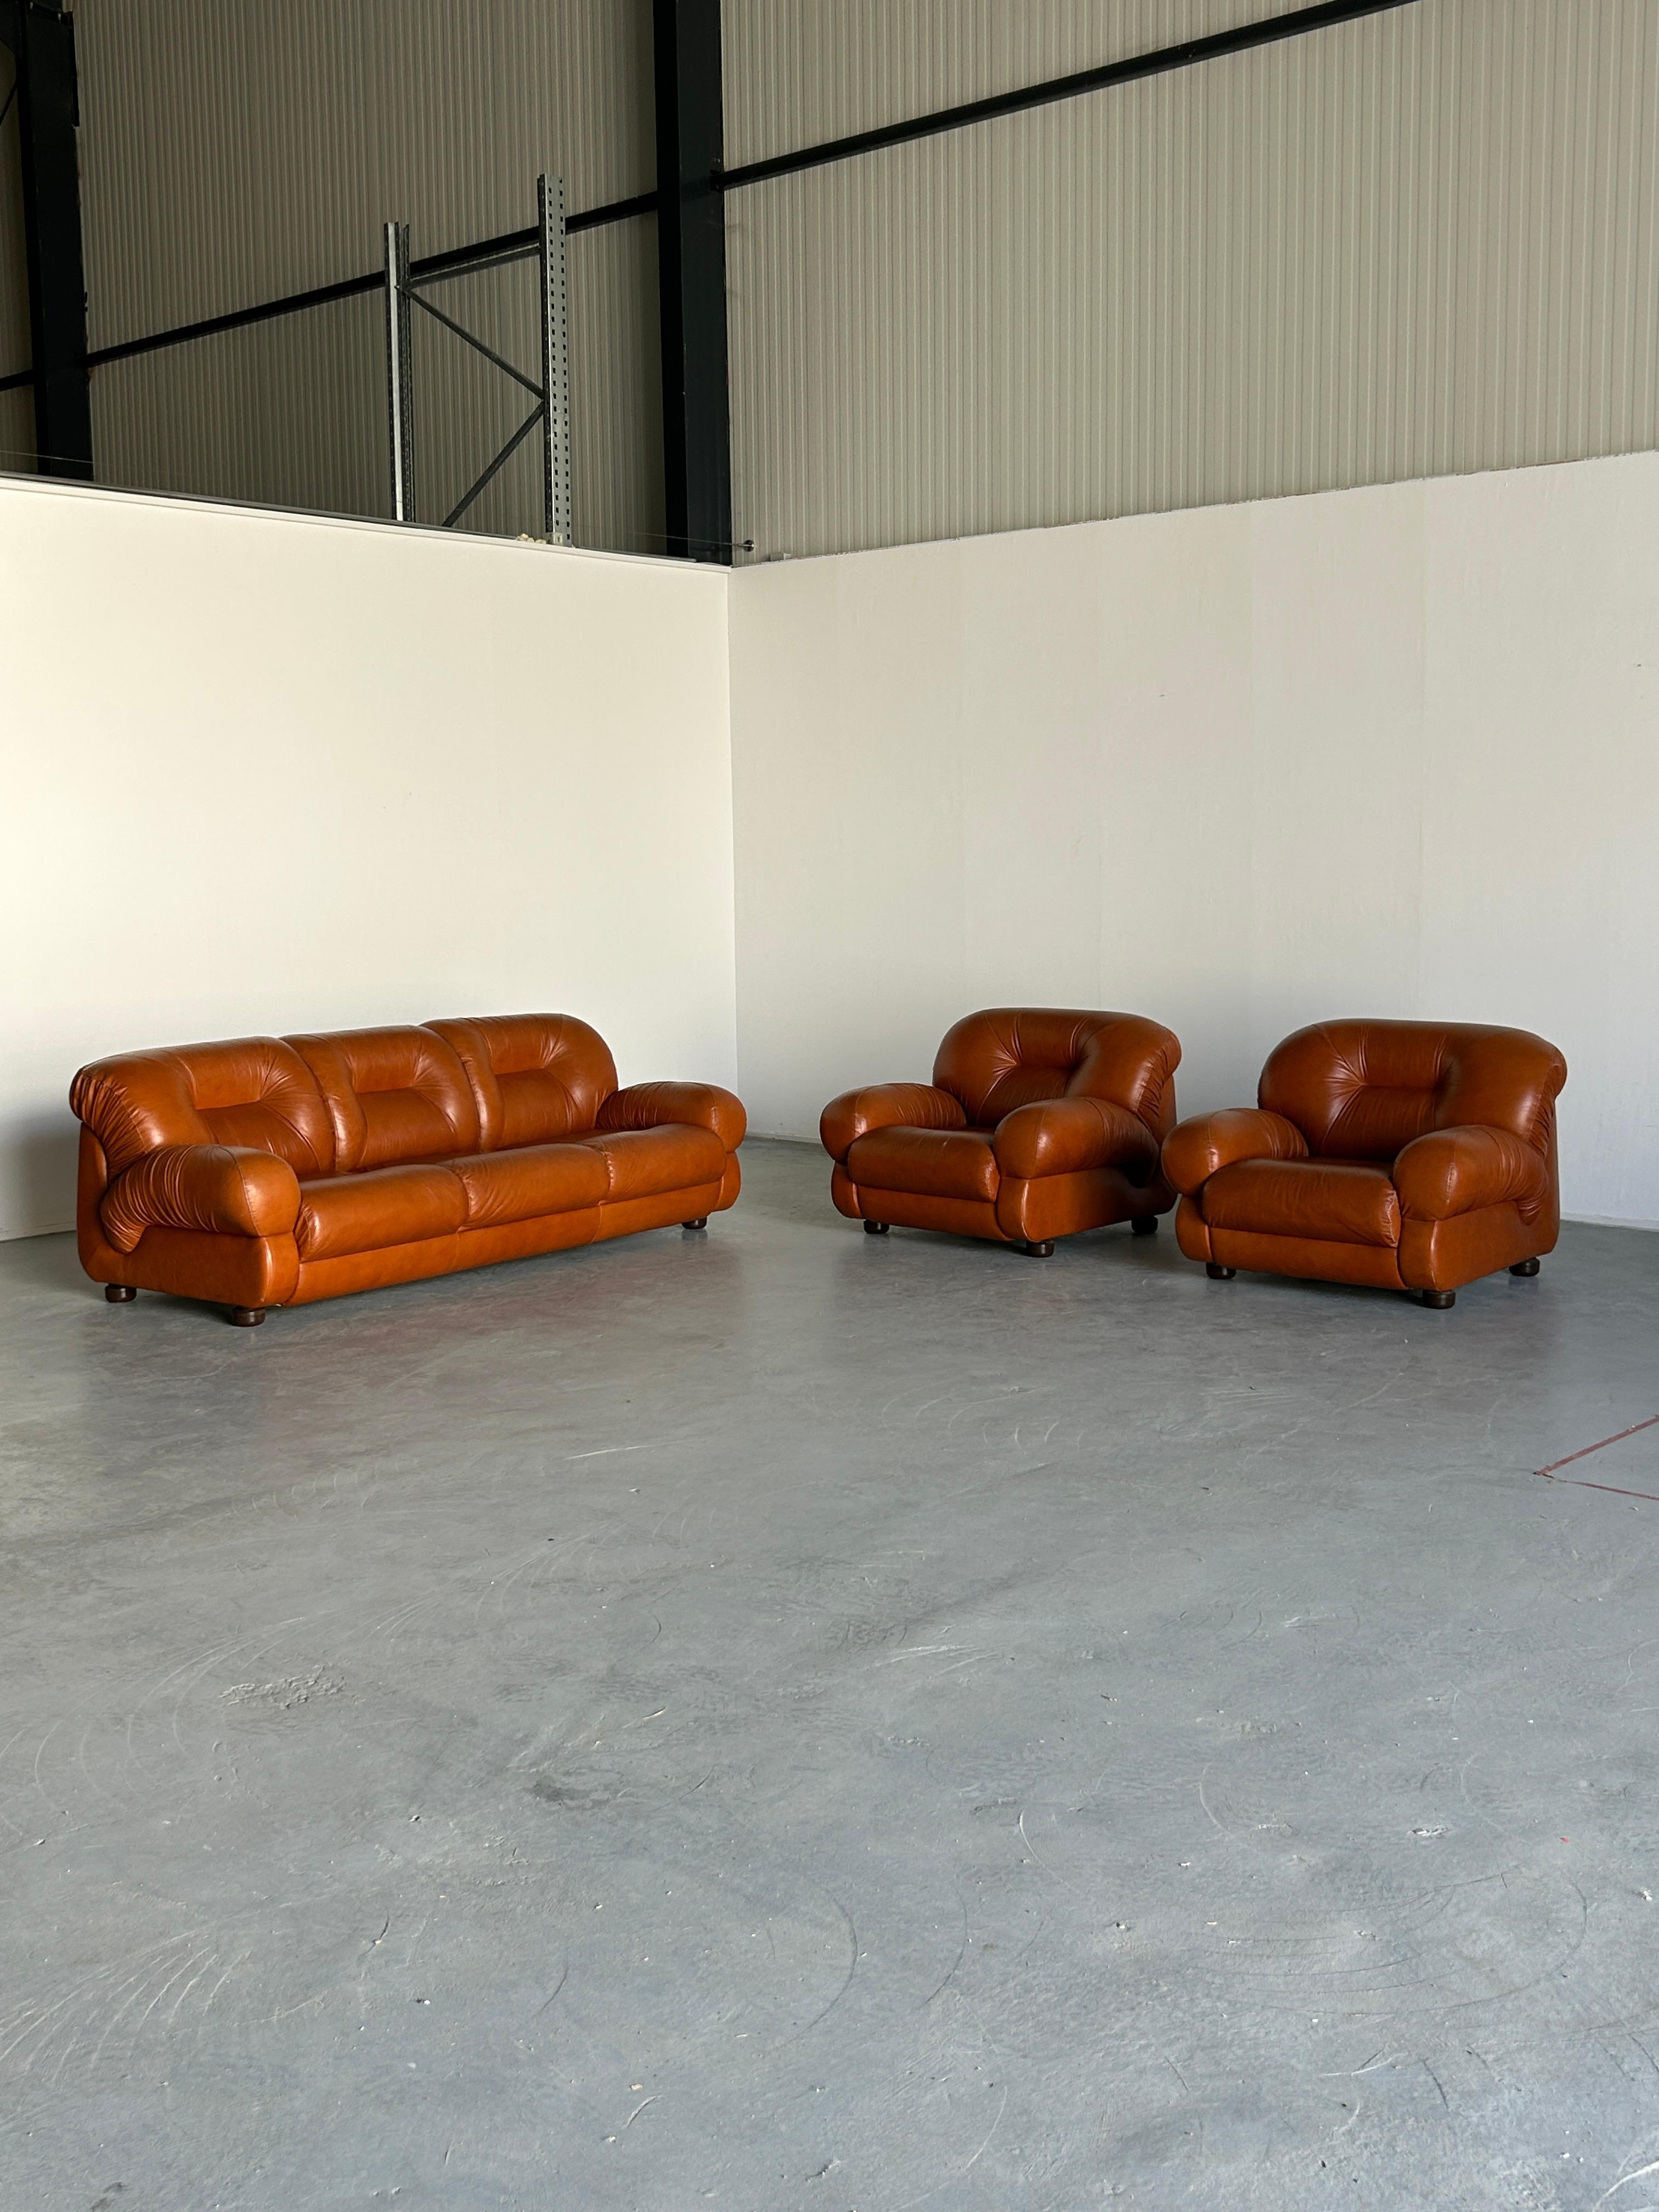 A beautiful three-part Mid-Century-Modern modular Italian seating set in ruched cognac leather, consisting of two armchairs and one three-seater sofa.

Overall in very good vintage condition with some expected signs of age, as indicated in the